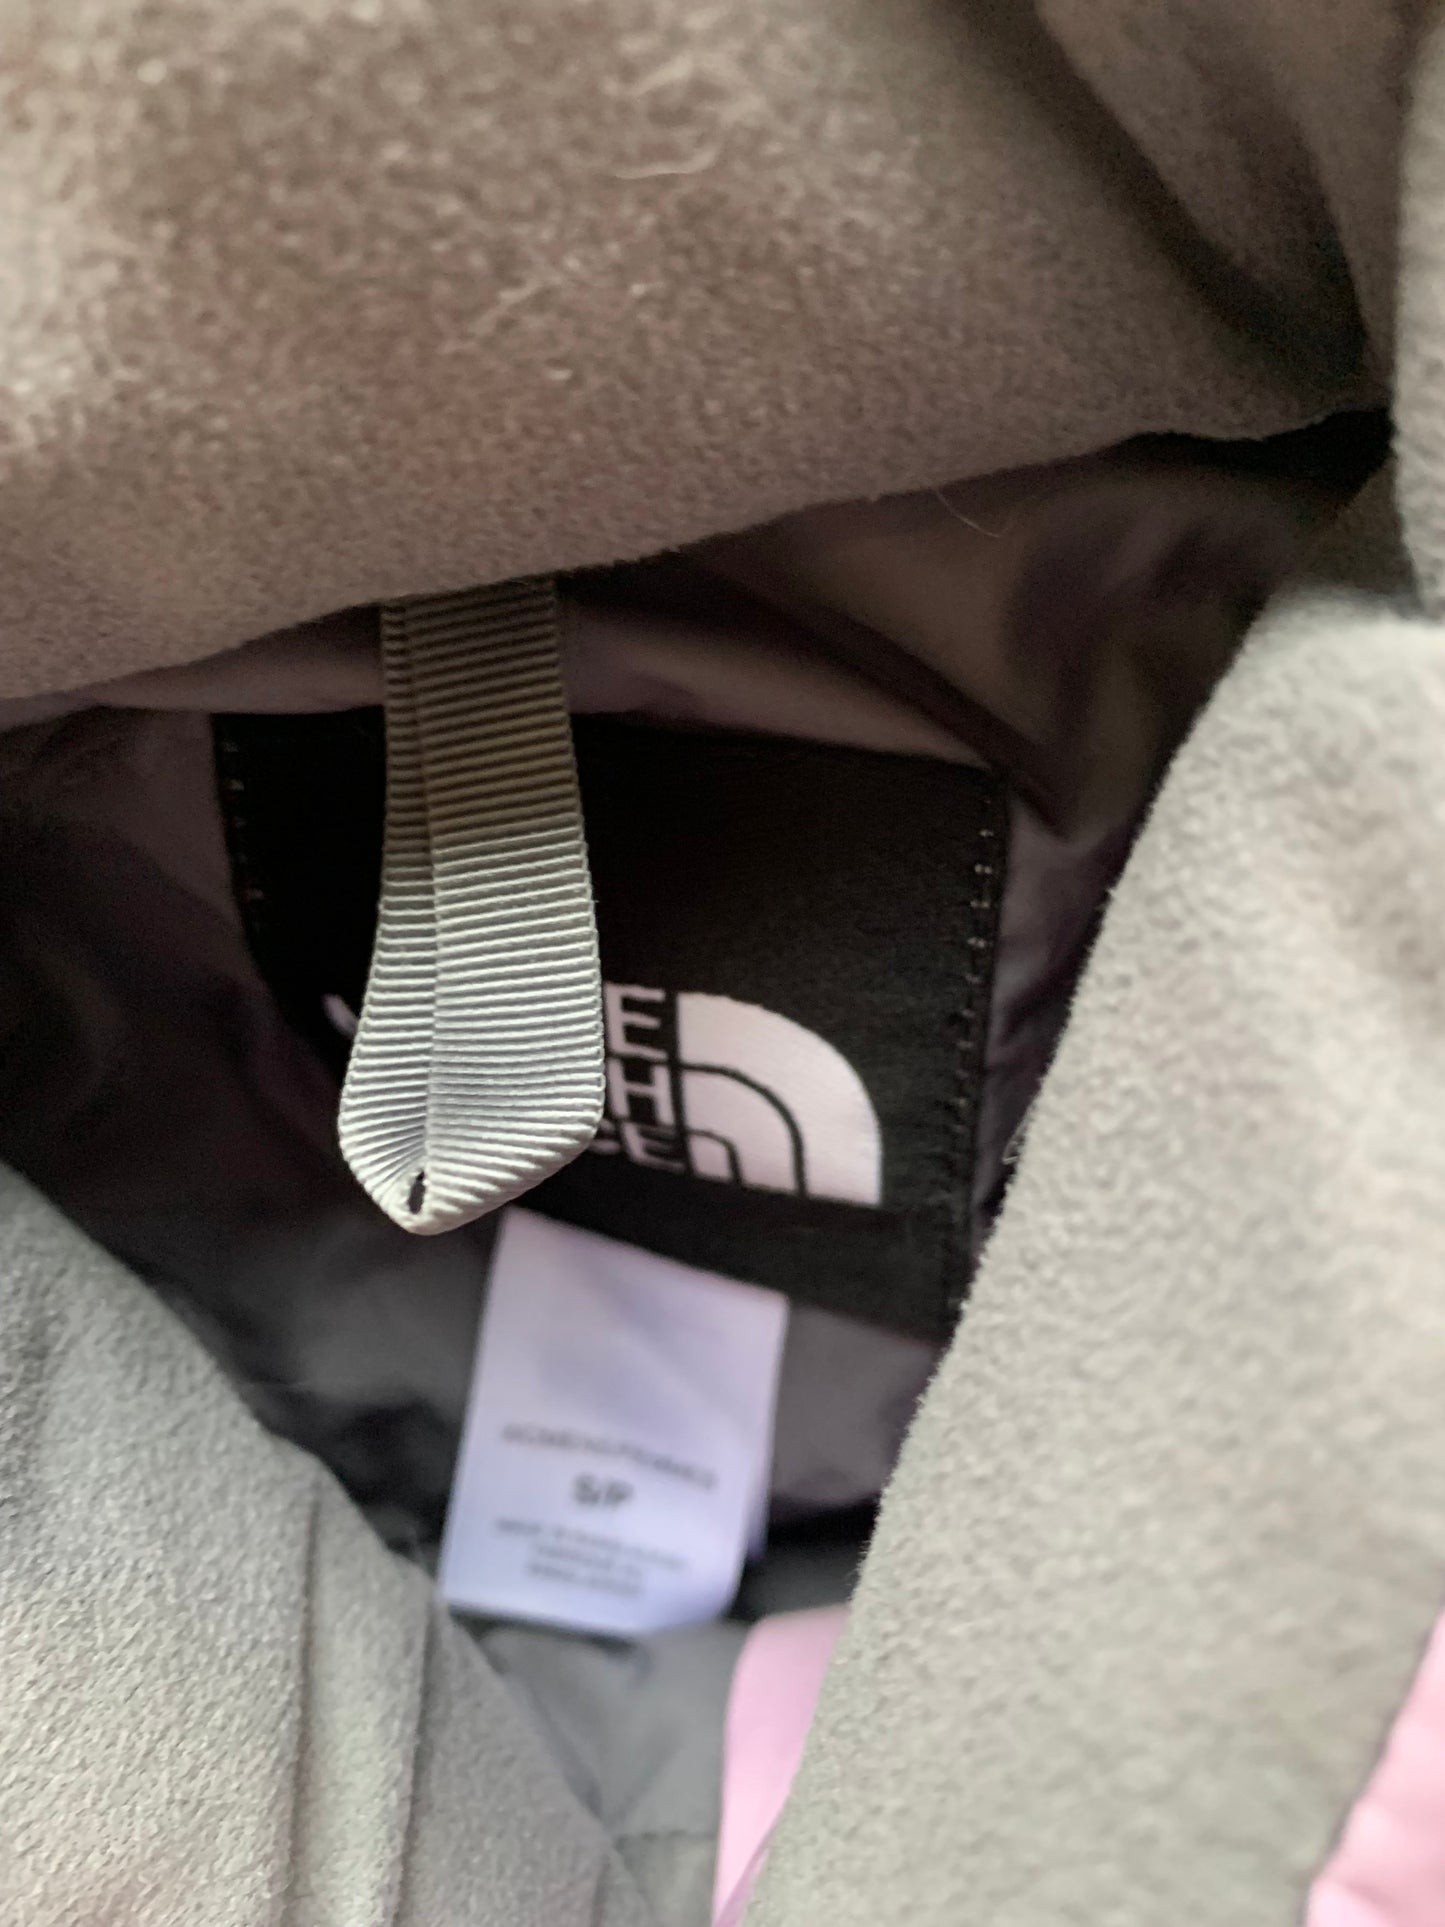 (S) The North Face 700 Vest